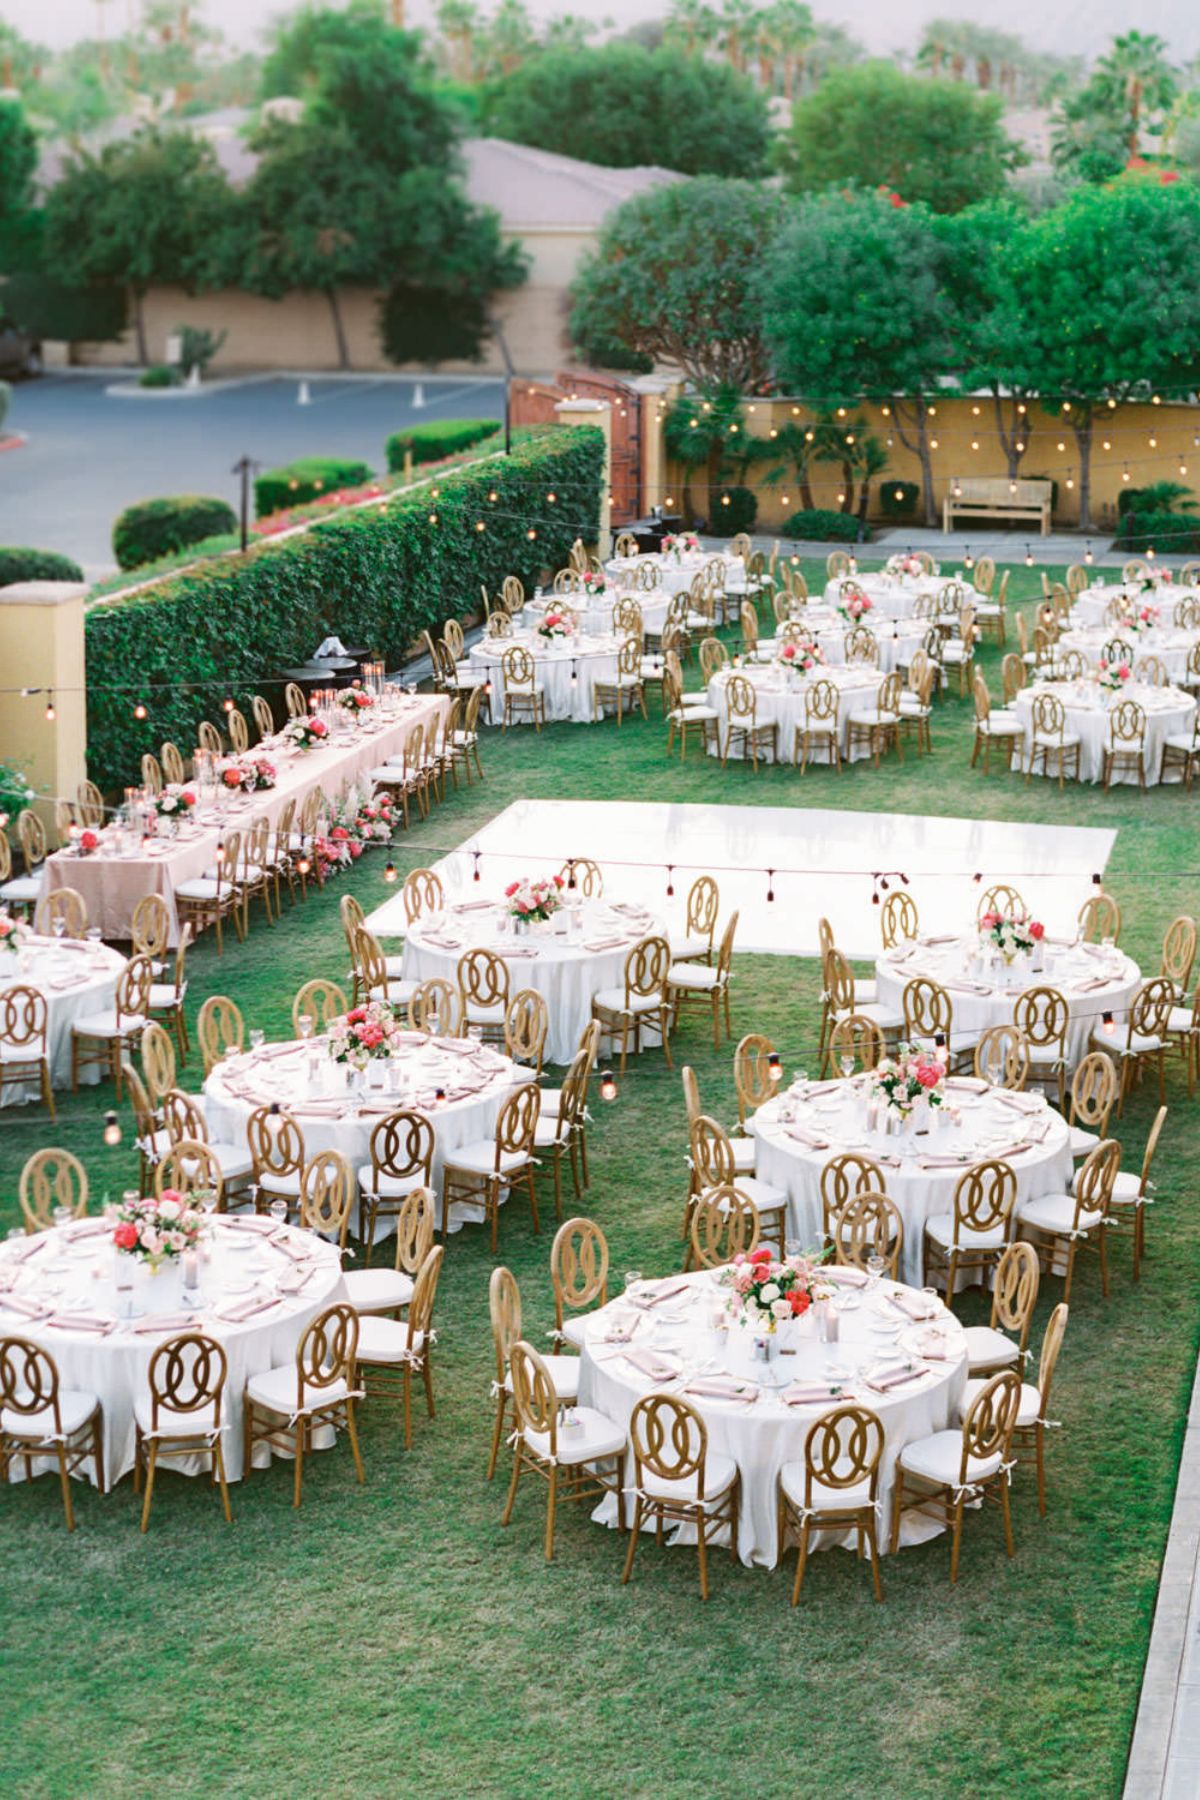 Table Layout of a Wedding Reception